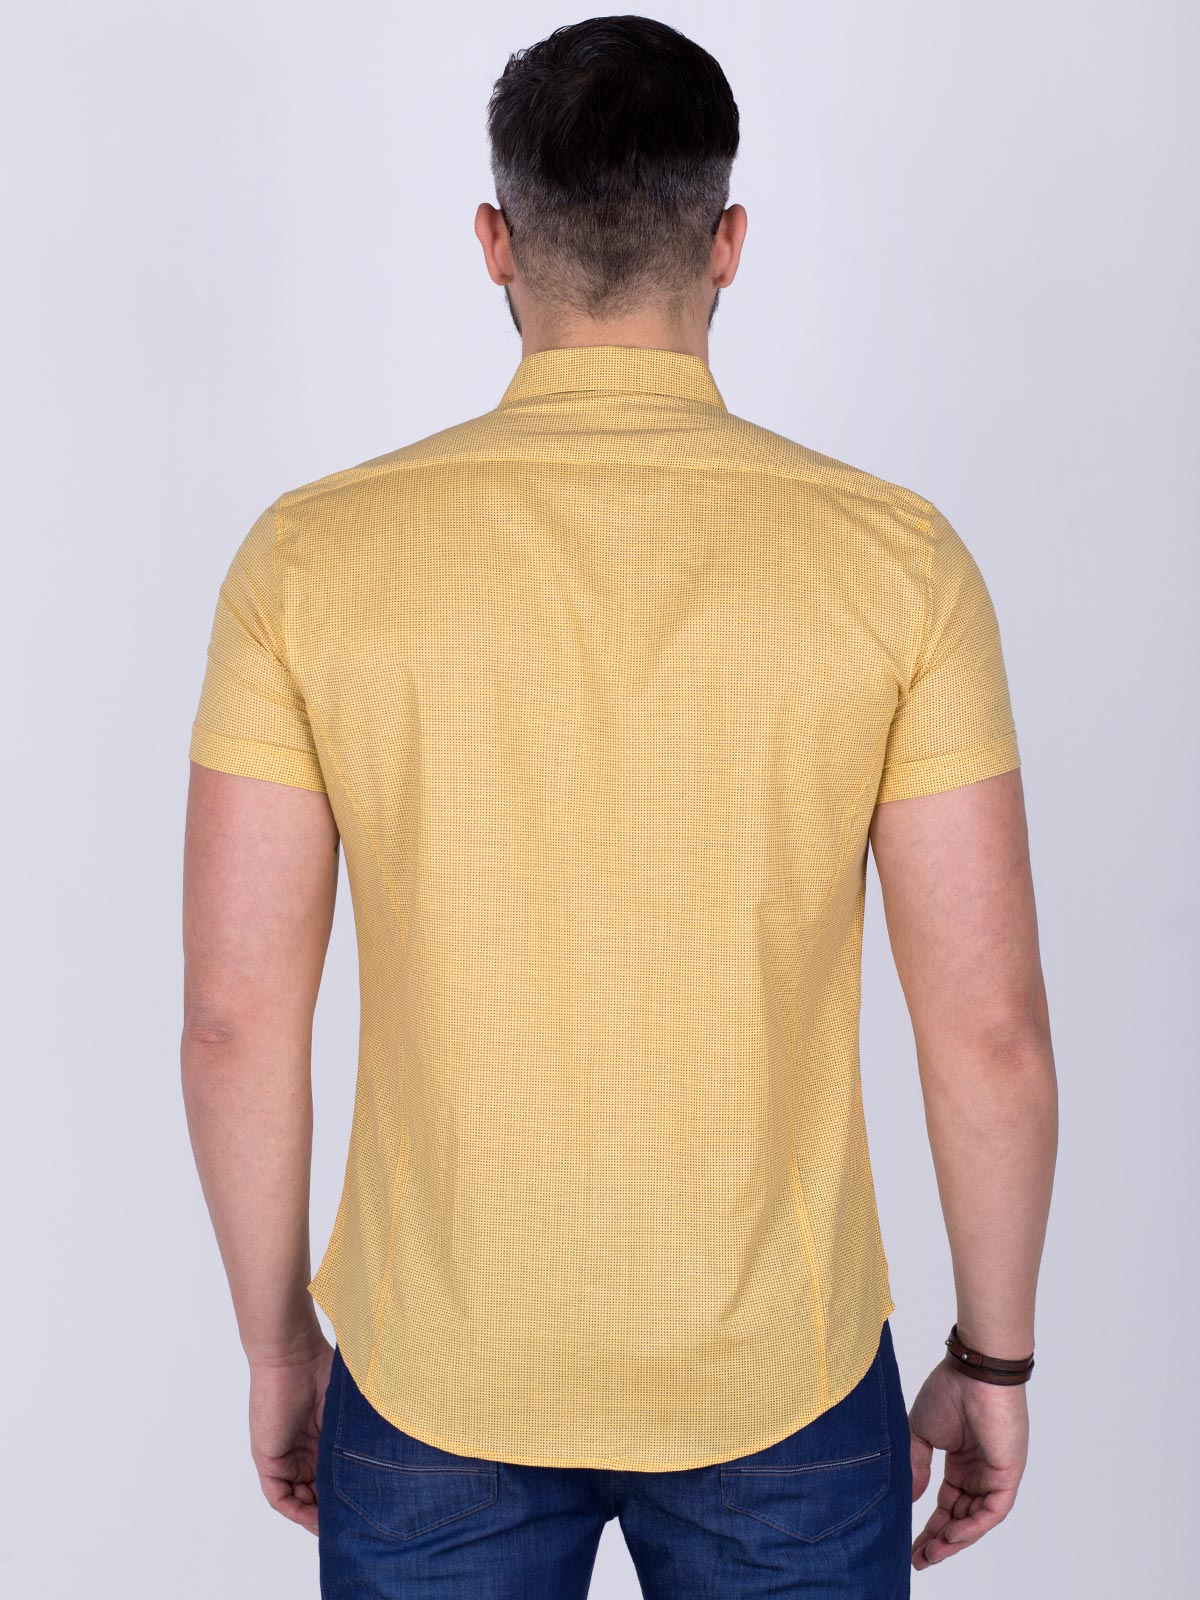 Yellow fitted shirt for small figures - 80200 € 11.25 img2